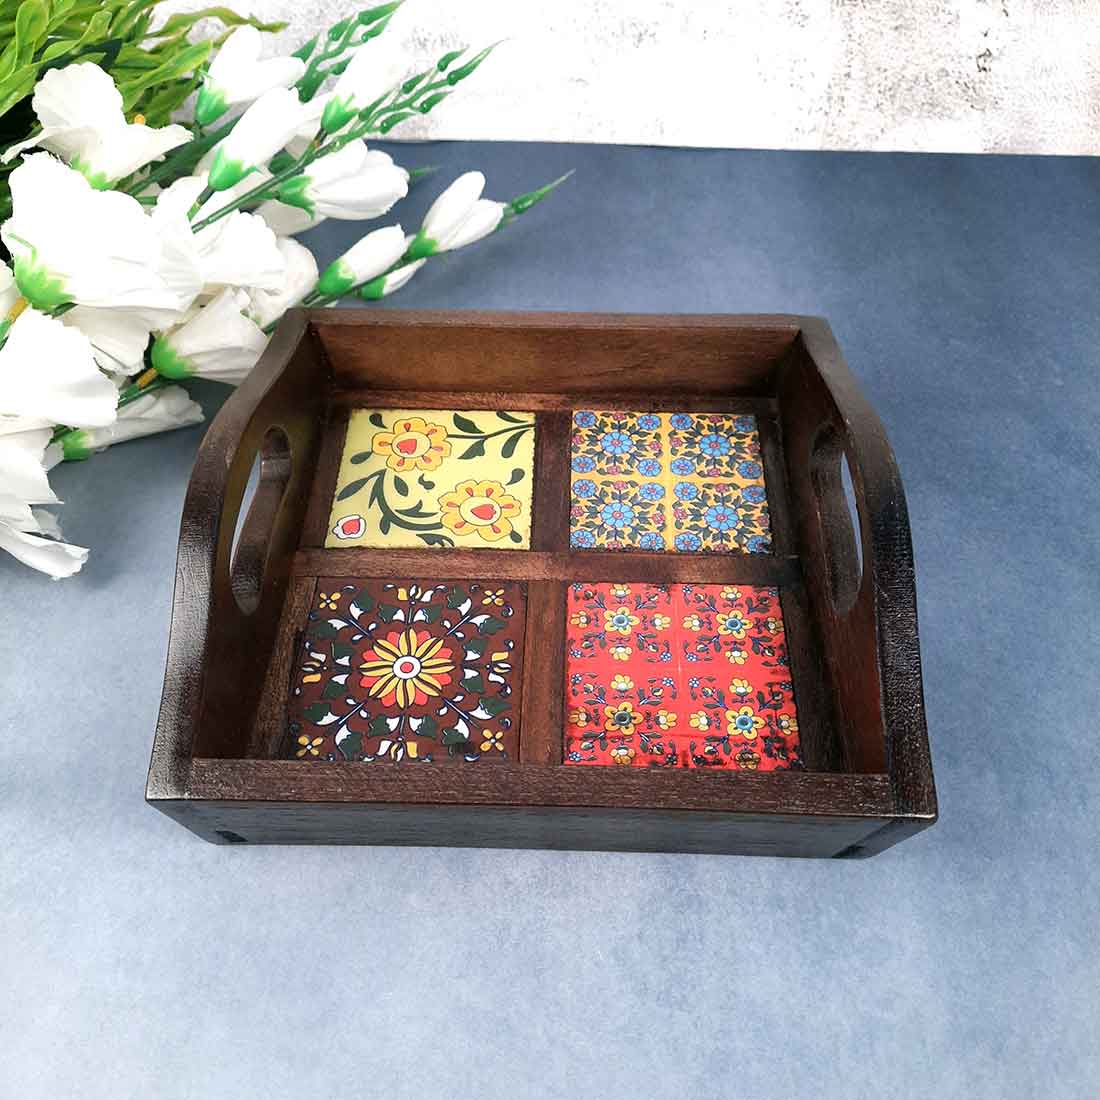 Serving Tray With In-Built Ceramic Tiles | Tea Tray - For Serving, Kitchen, Home Decor & Gifts - 9 Inch -Apkamart #Style_Classic